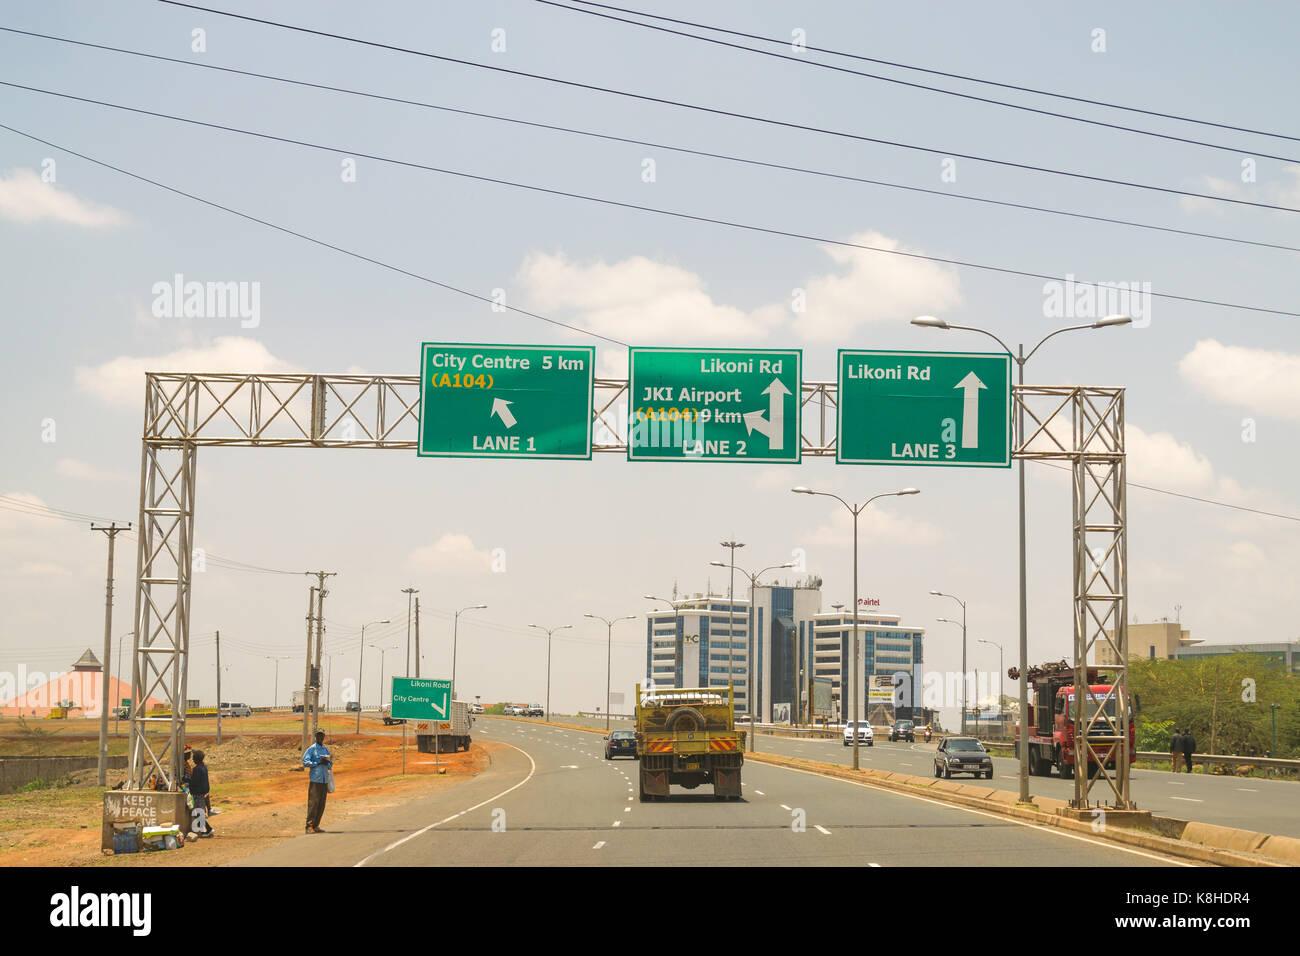 Southern bypass highway with vehicles driving in both directions and road signs with directions above, Kenya Stock Photo